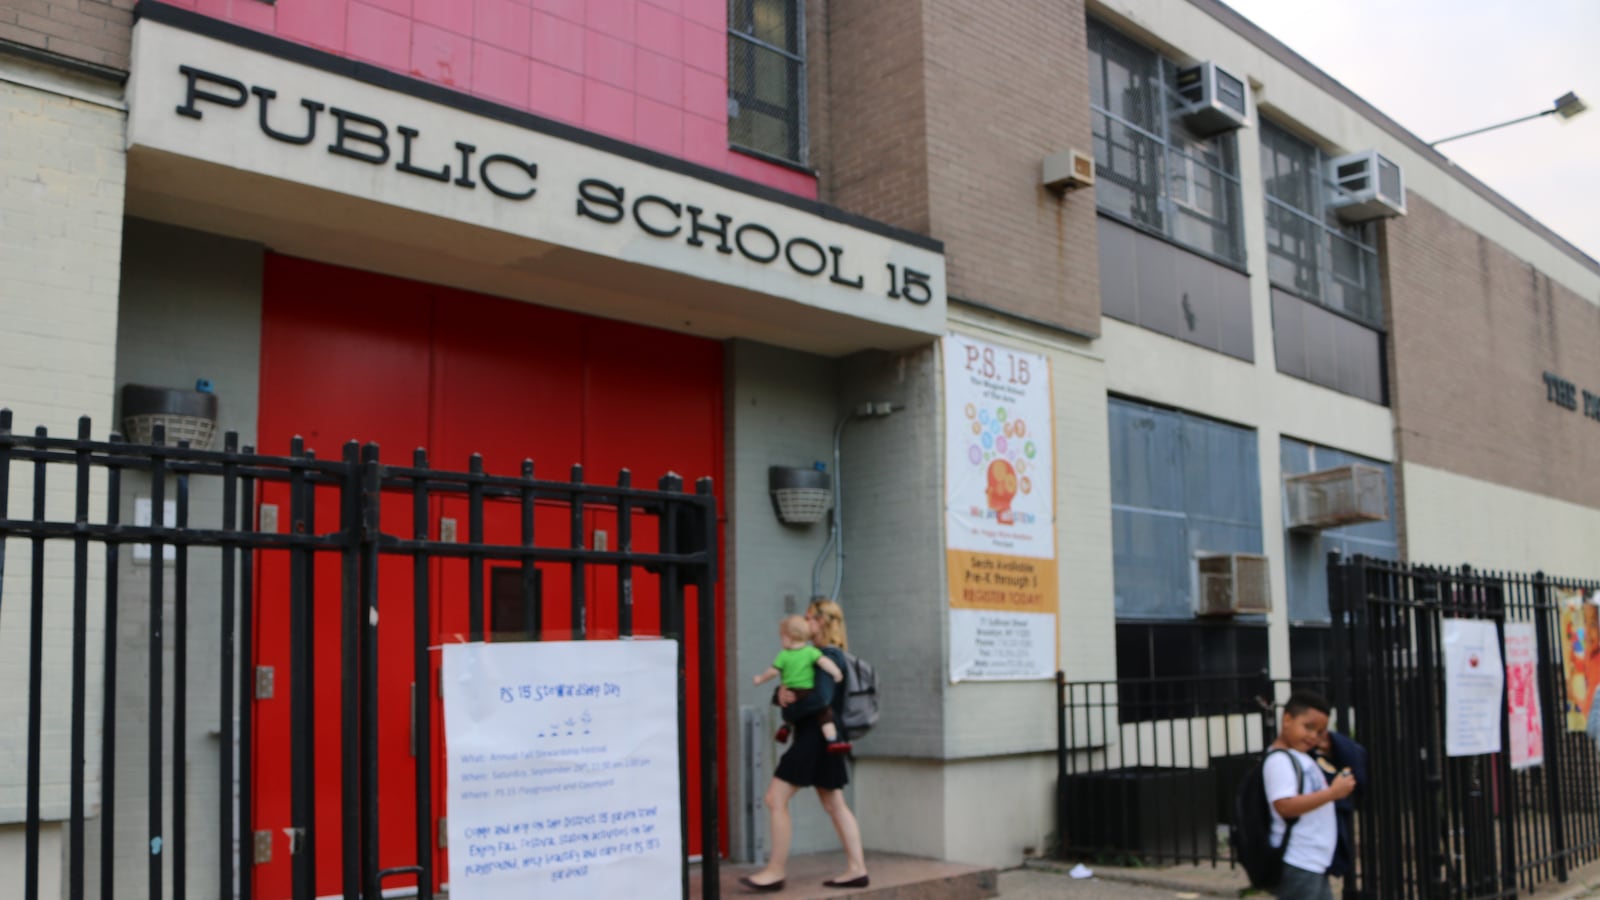 Attendance zones around seven elementary schools in Brooklyn's District 15 could change to address enrollment issues and help spur integration.